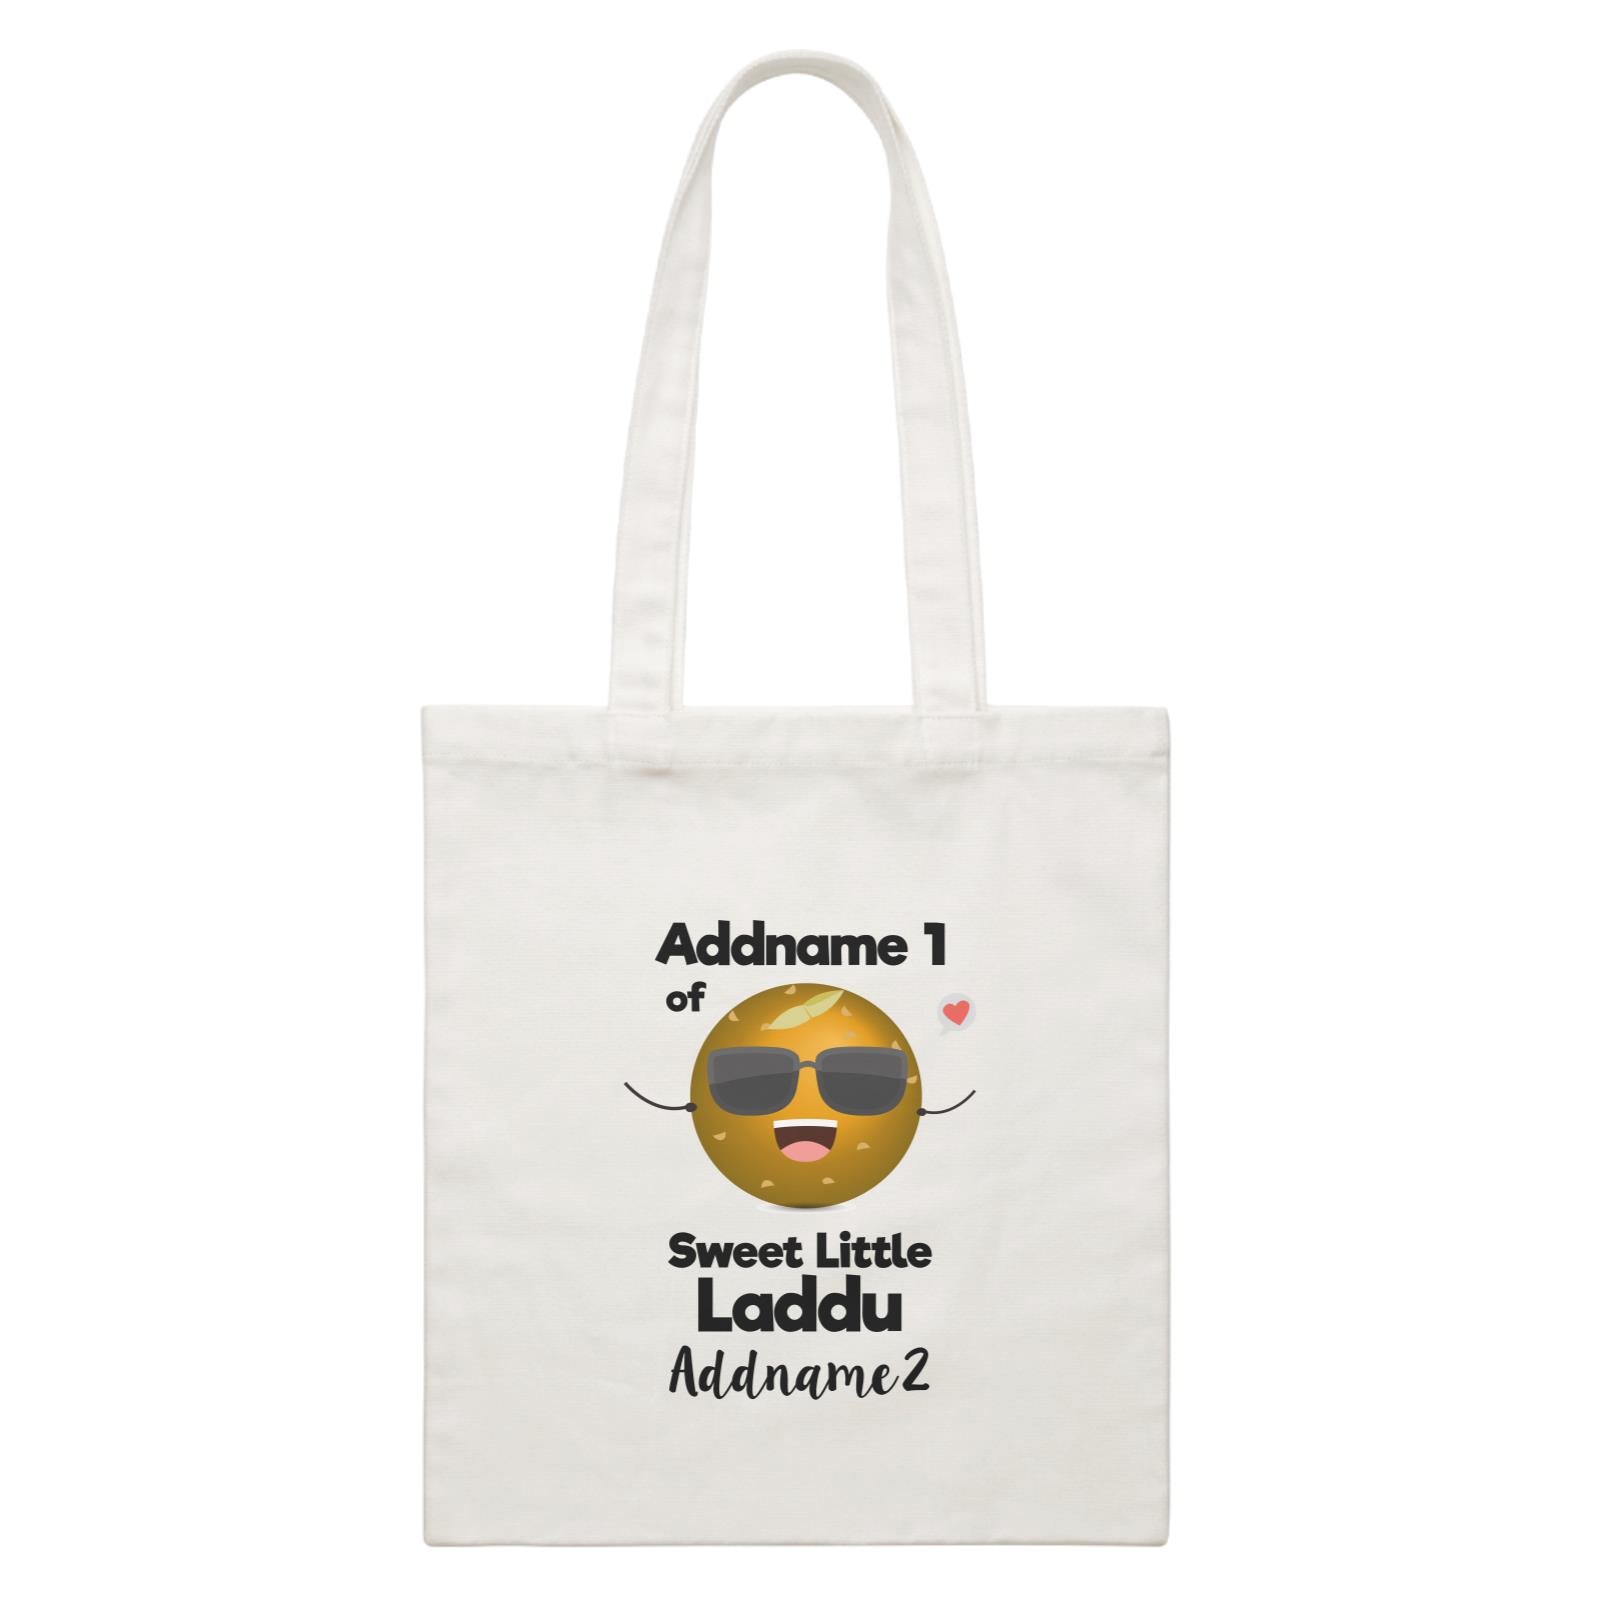 Addname 1 of Sweet Little Laddu Addname 2 White Canvas Bag